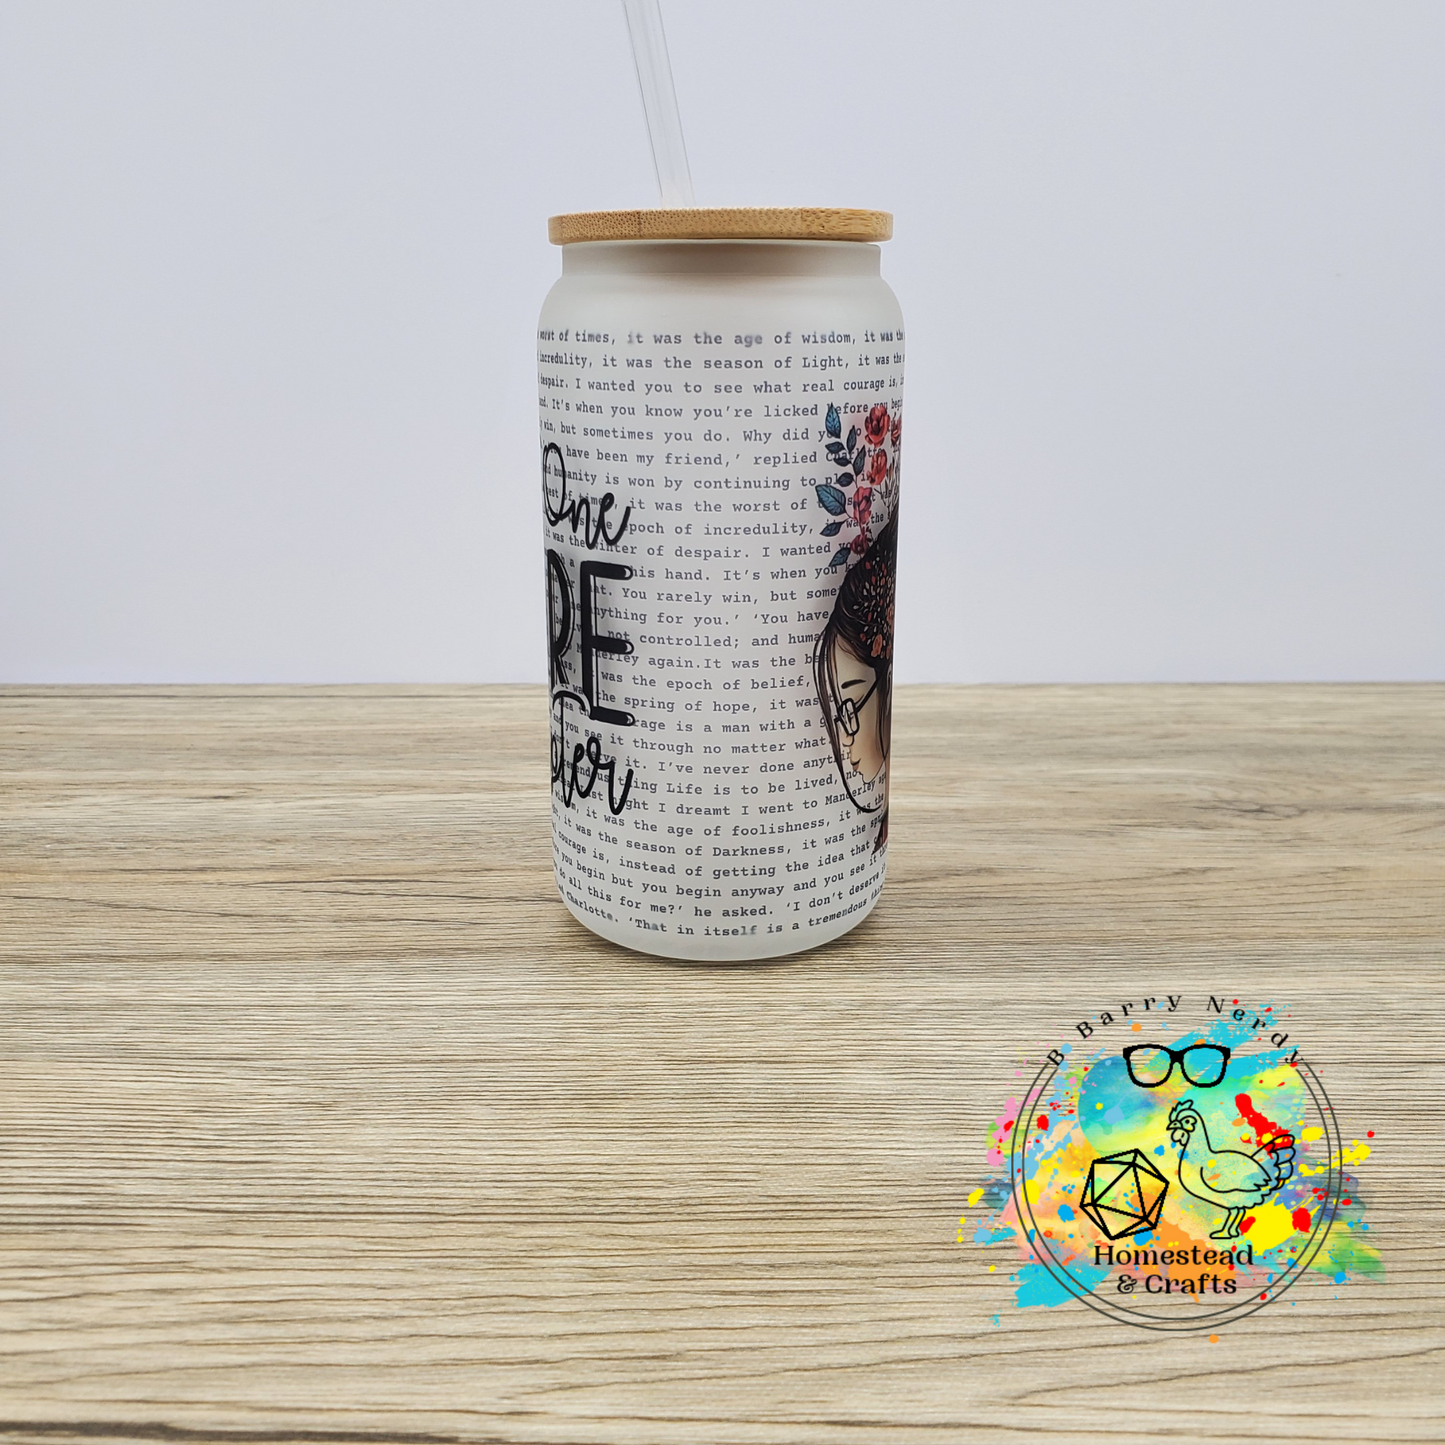 Just One More Chapter with Words Background, 16oz Sublimated Glass Can